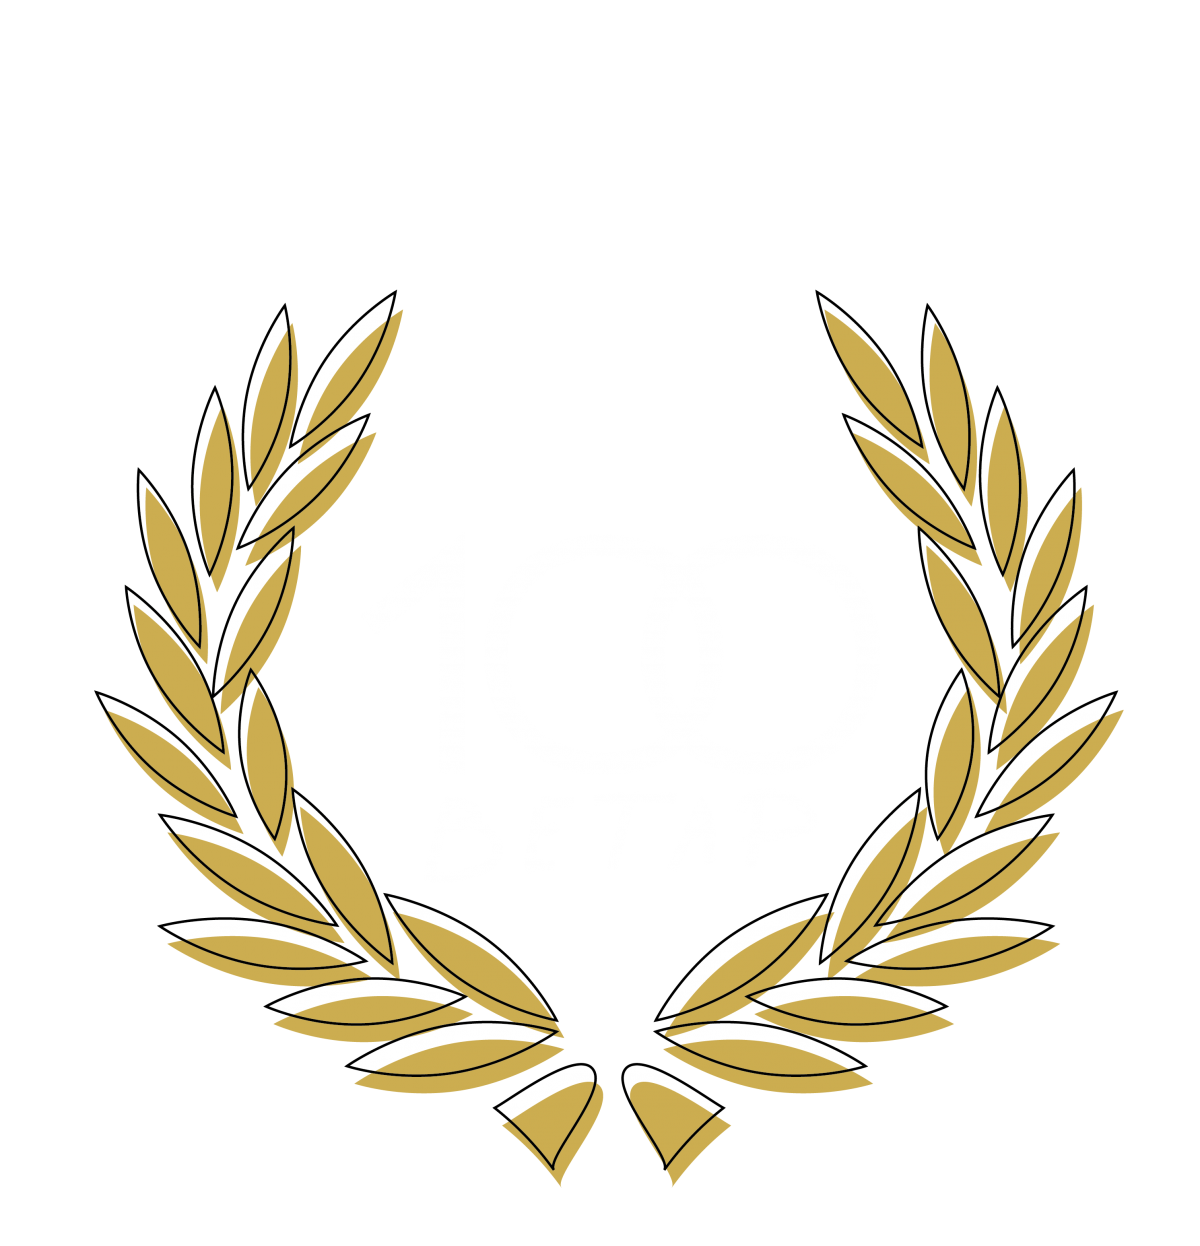 100 years off betap